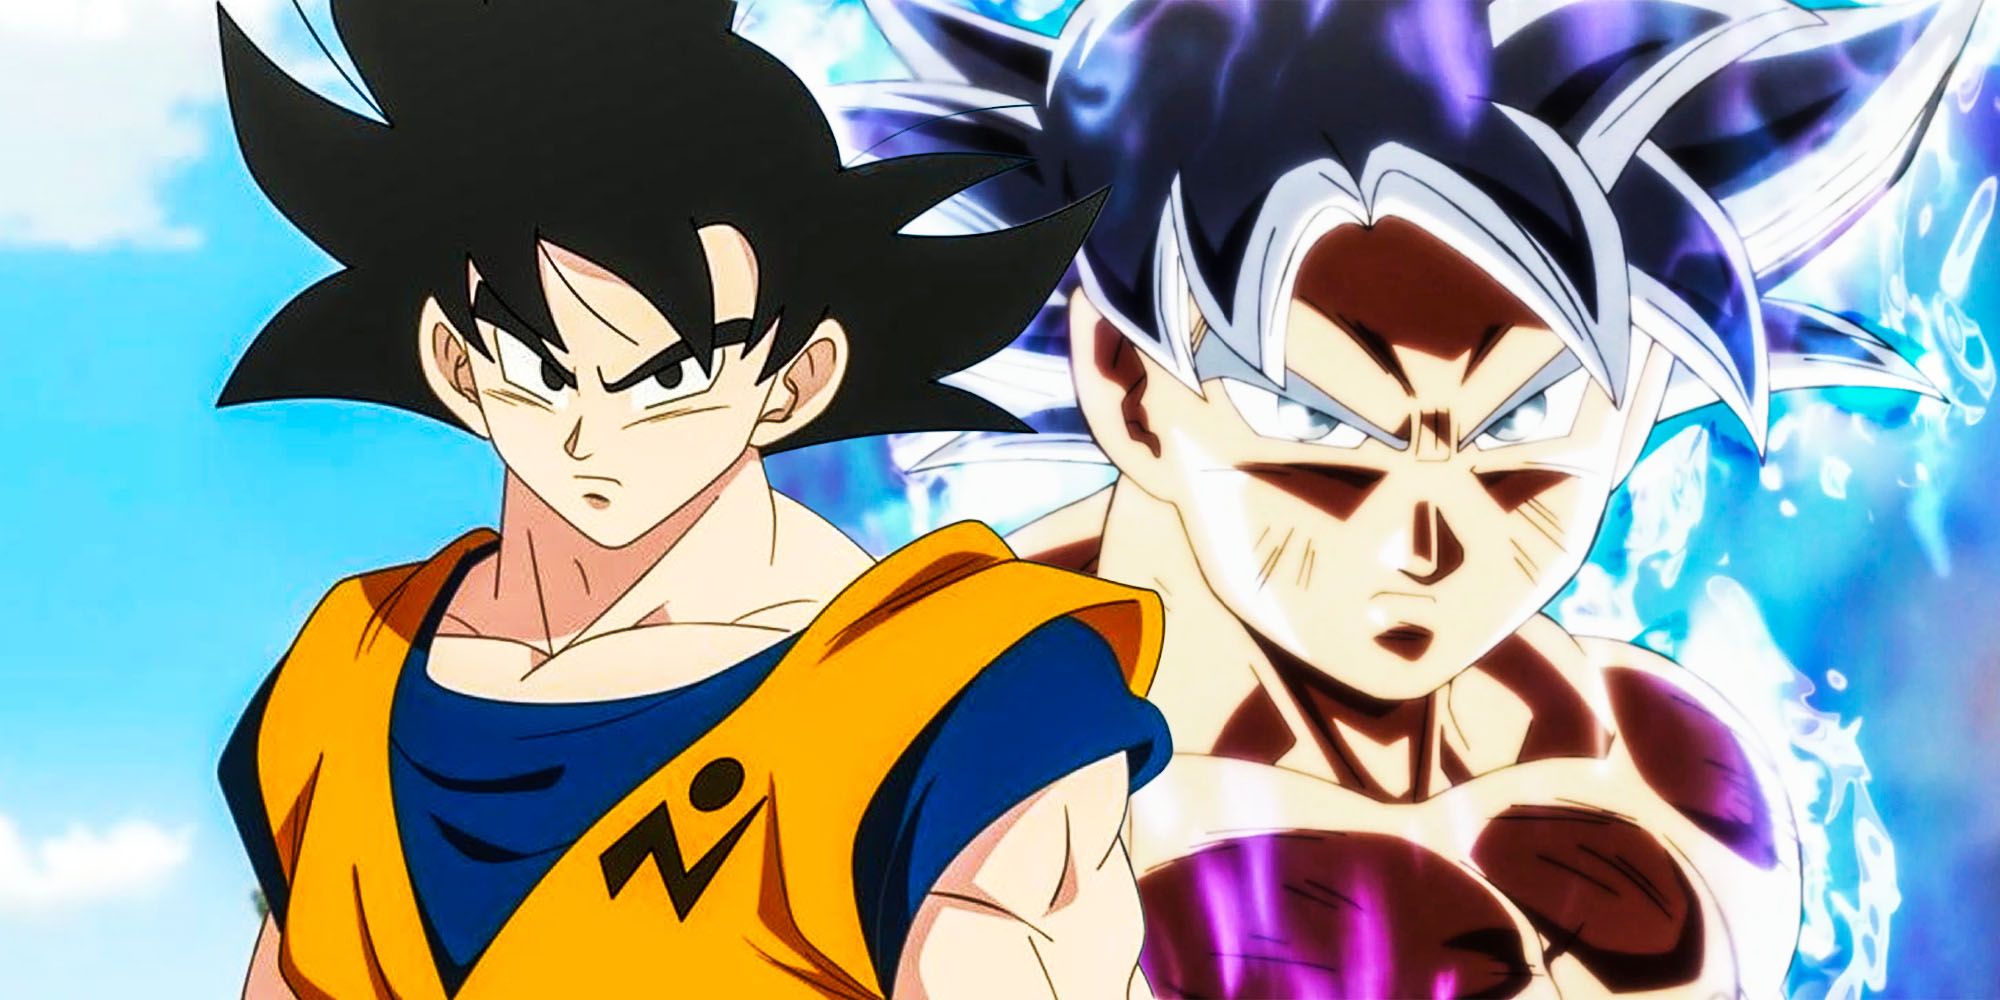 Goku's Strongest Form is More Powerful Than Ever in New Fanart